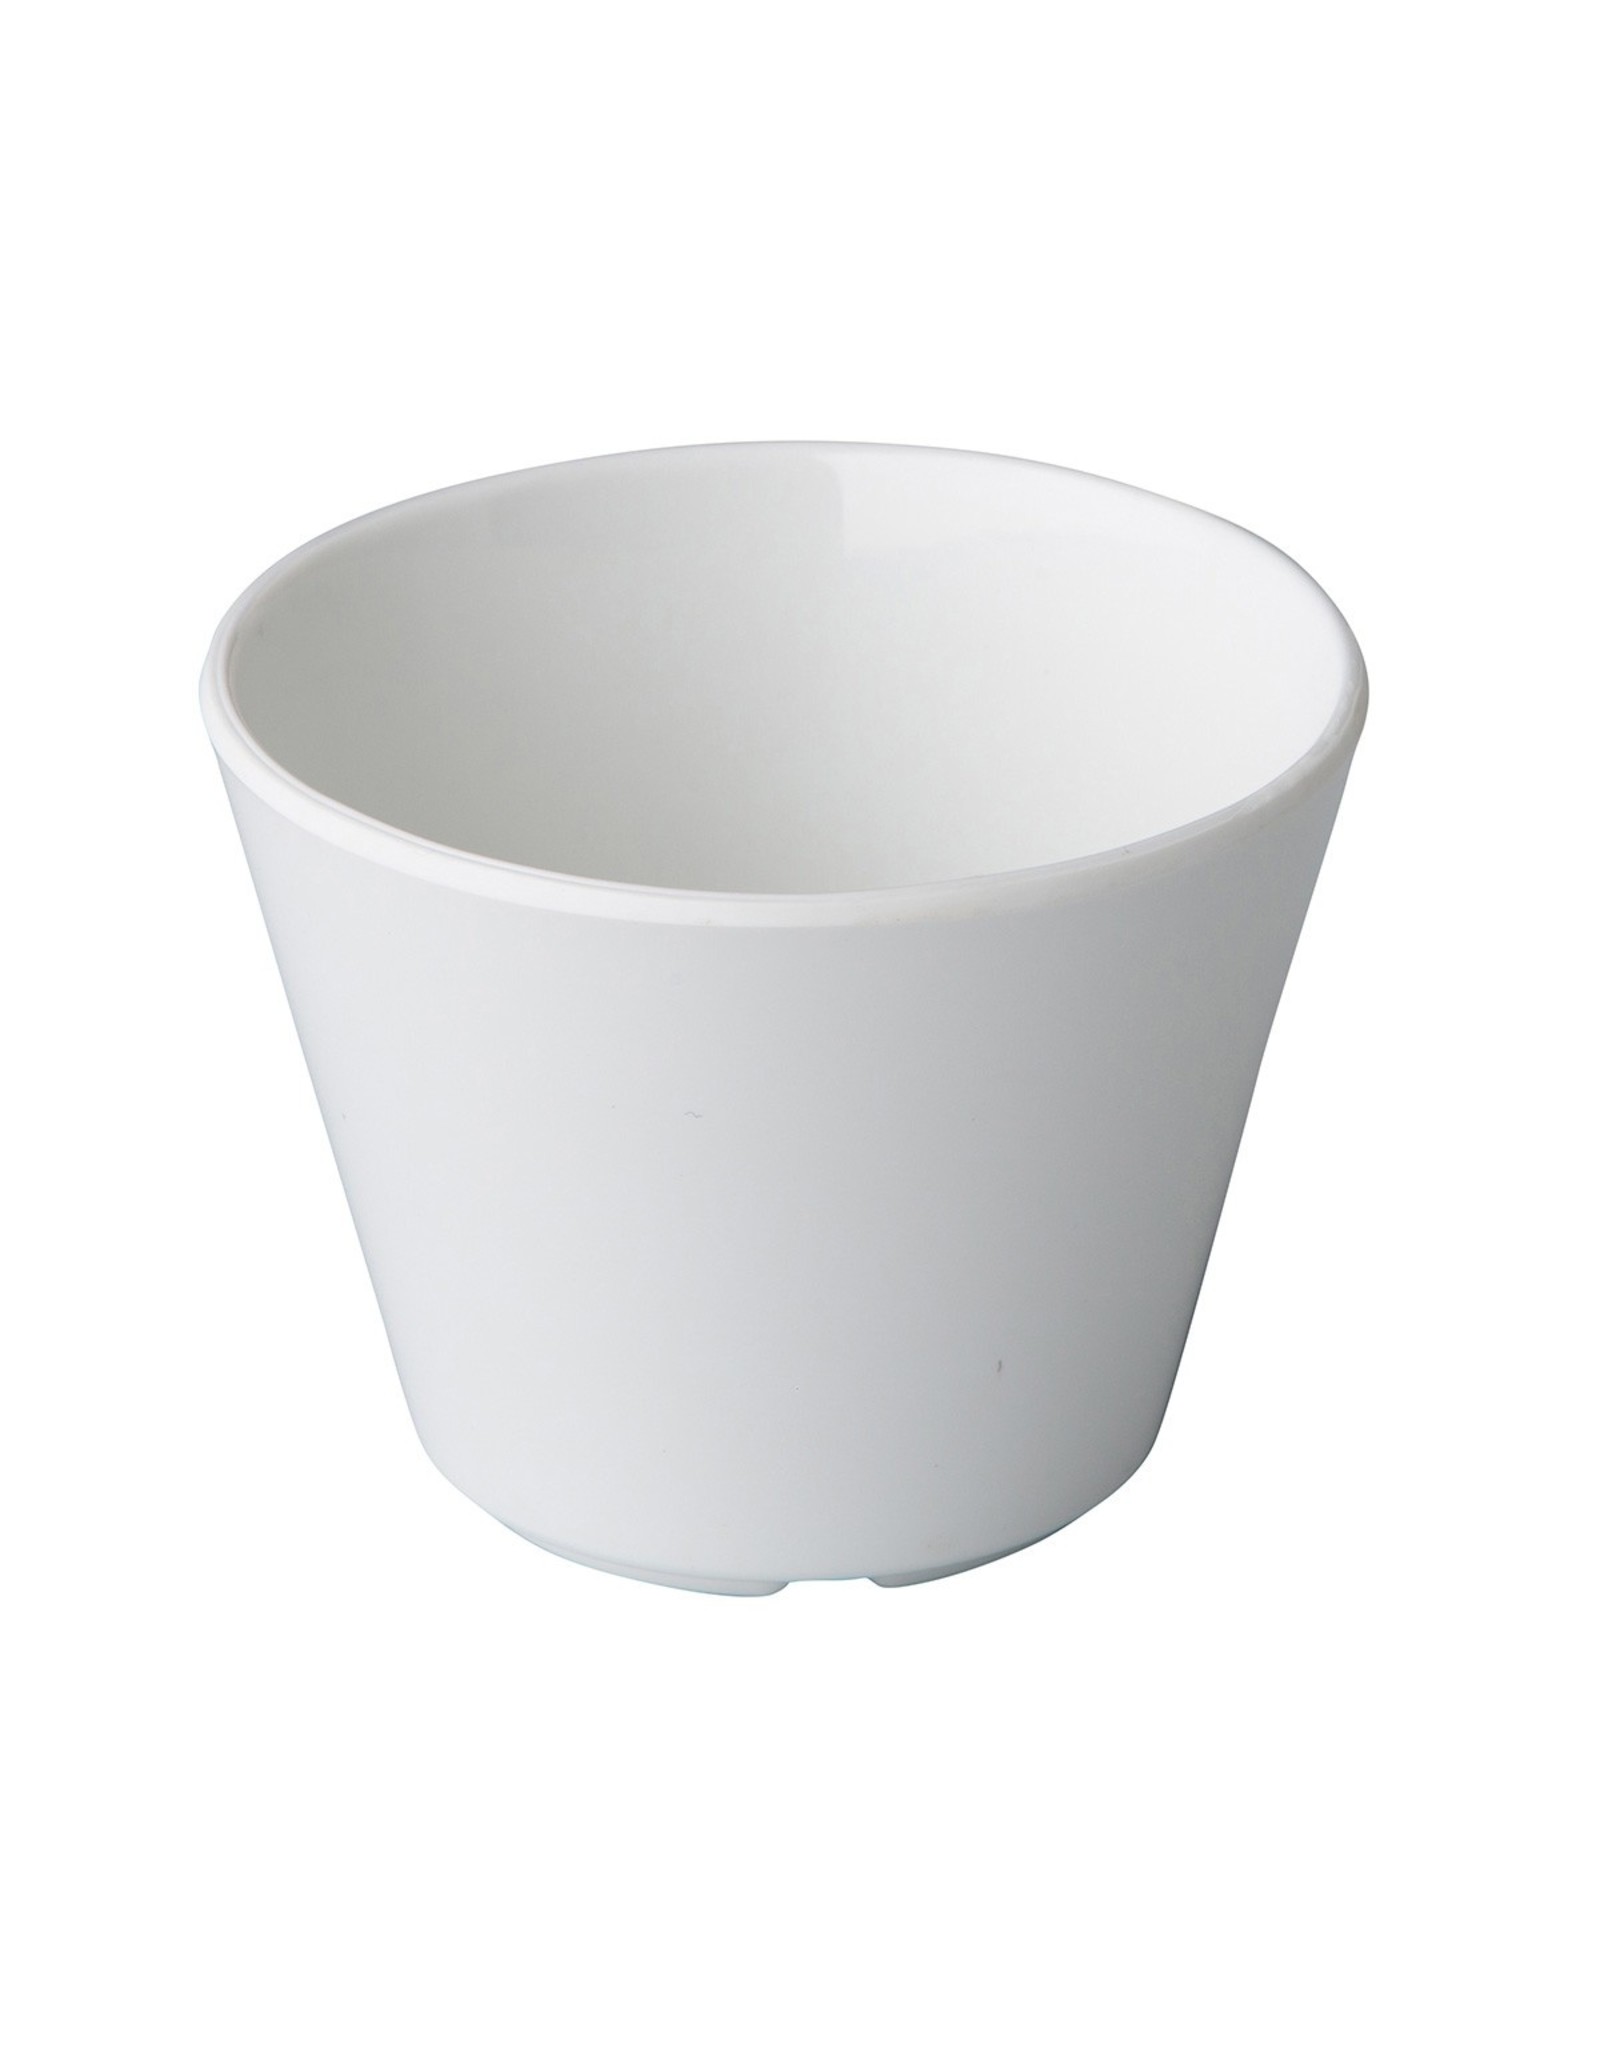 Stylepoint Conic sauce bowl 7 x 4,6 cm